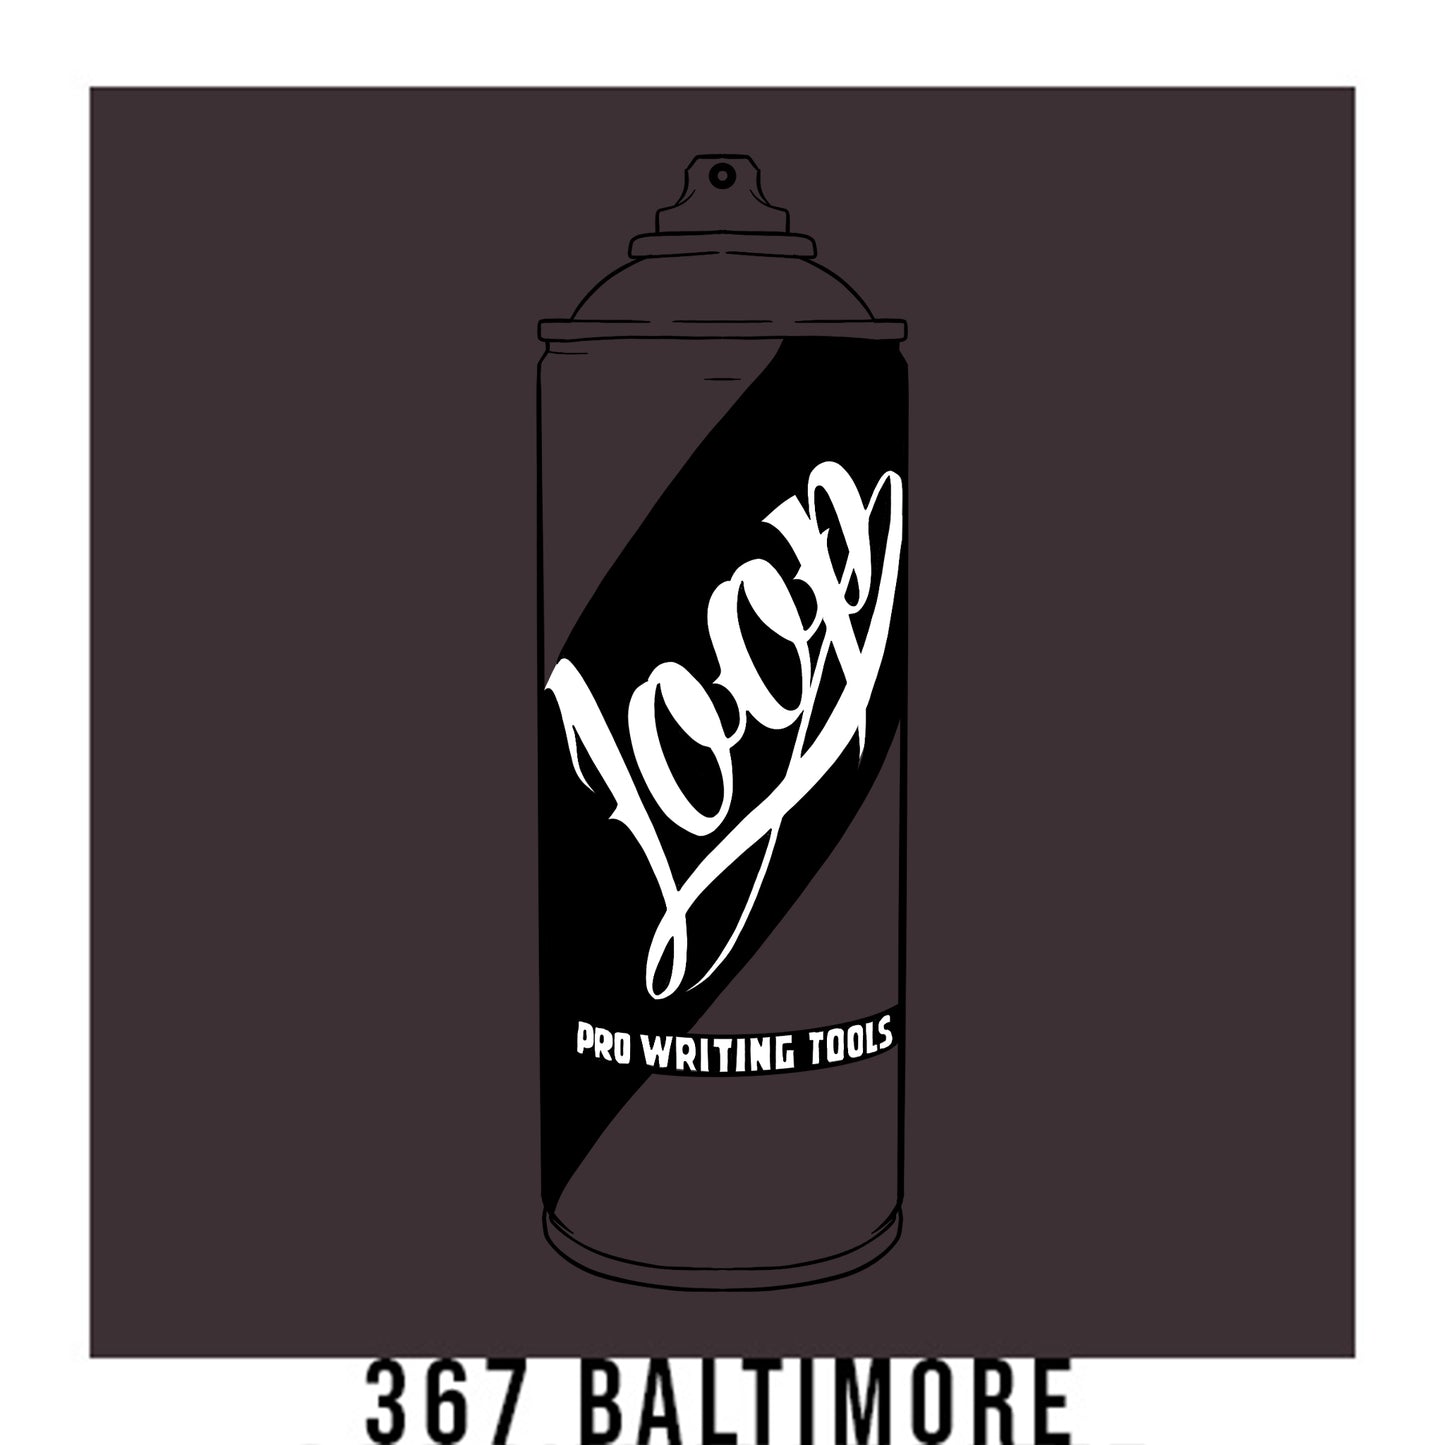 A black outline drawing of a dark muted purple spray paint can with the word "Loop" written on the face in script. The background is a color swatch of the same dark muted purple with a white border with the words "367 Baltimore" at the bottom.